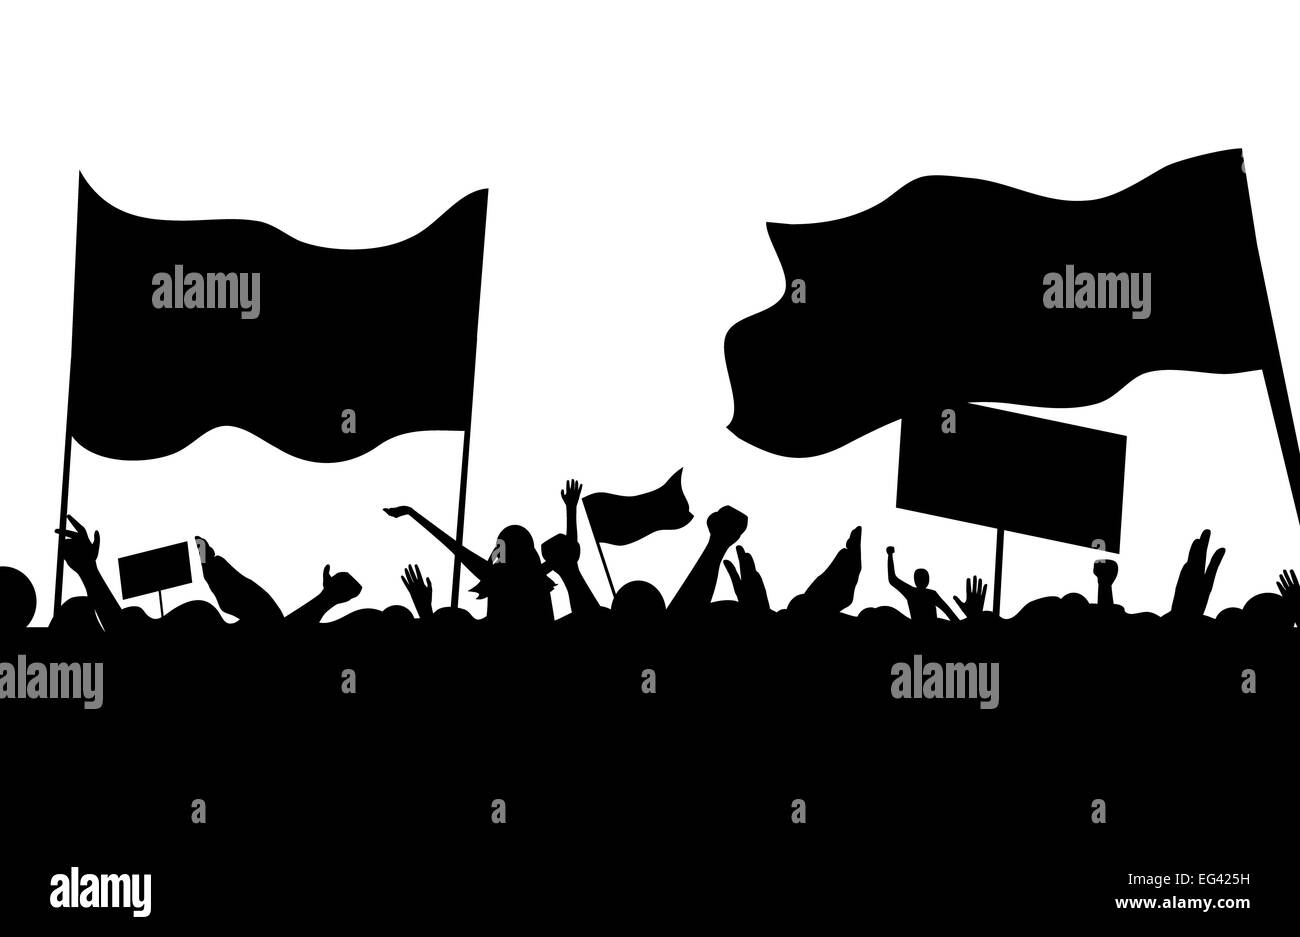 protesters riots workers on strike illustration Stock Photo